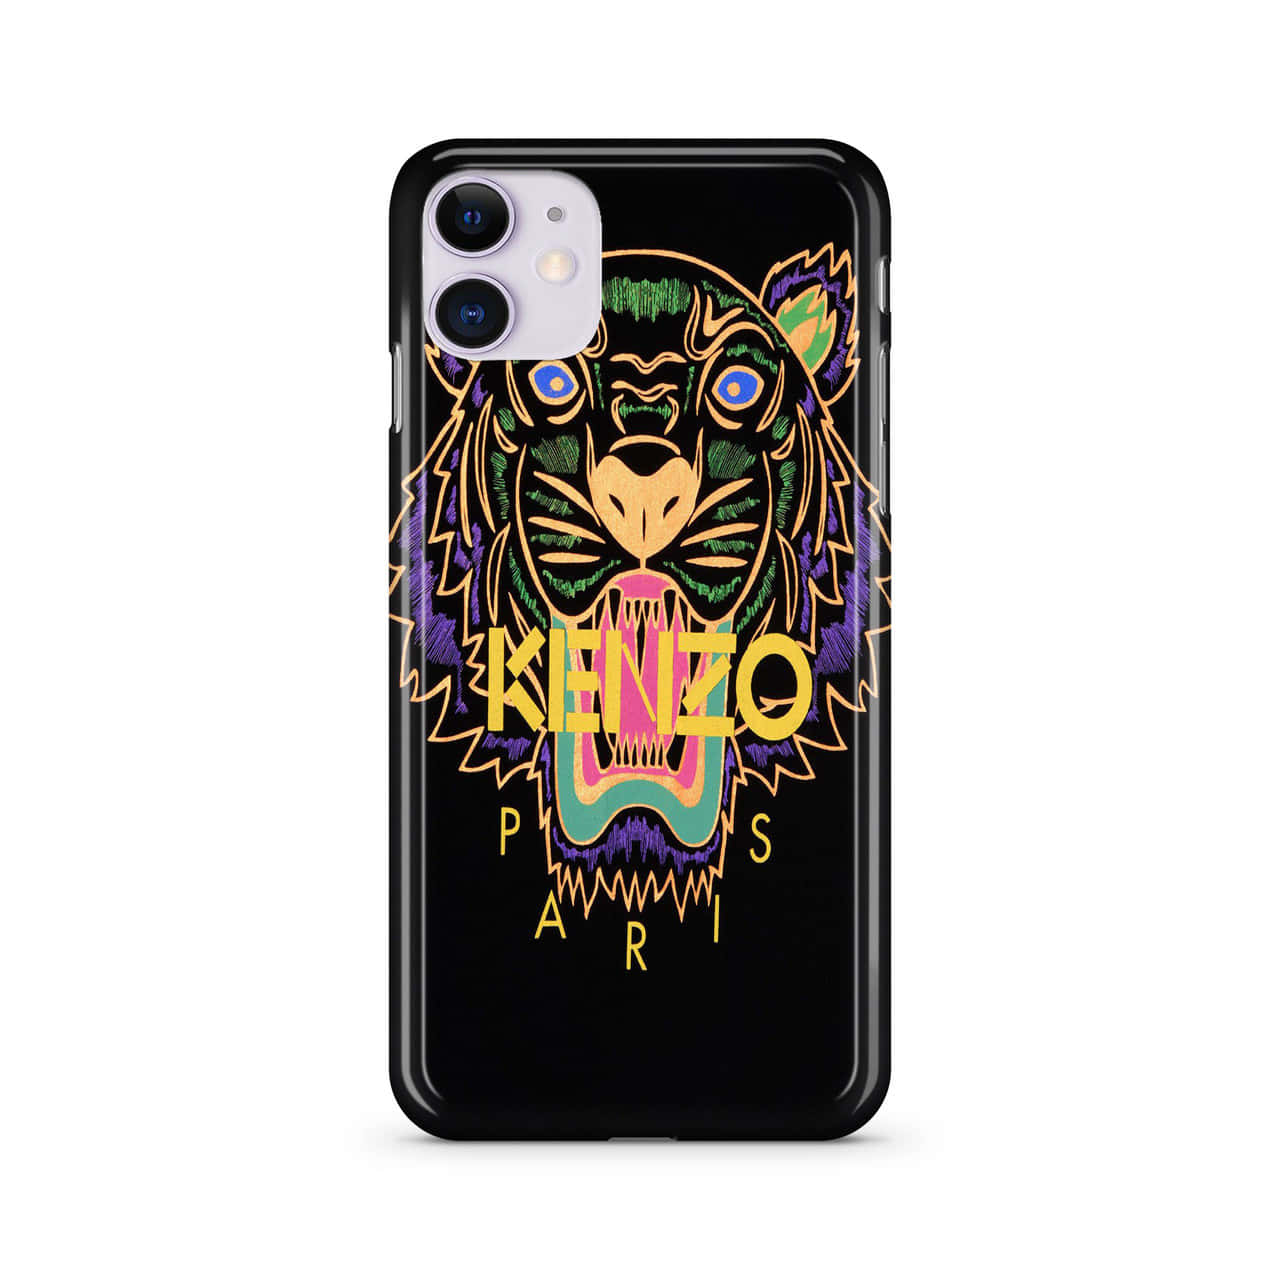 Caption: Bold Kenzo Phone Case with Iconic Tiger Design Wallpaper